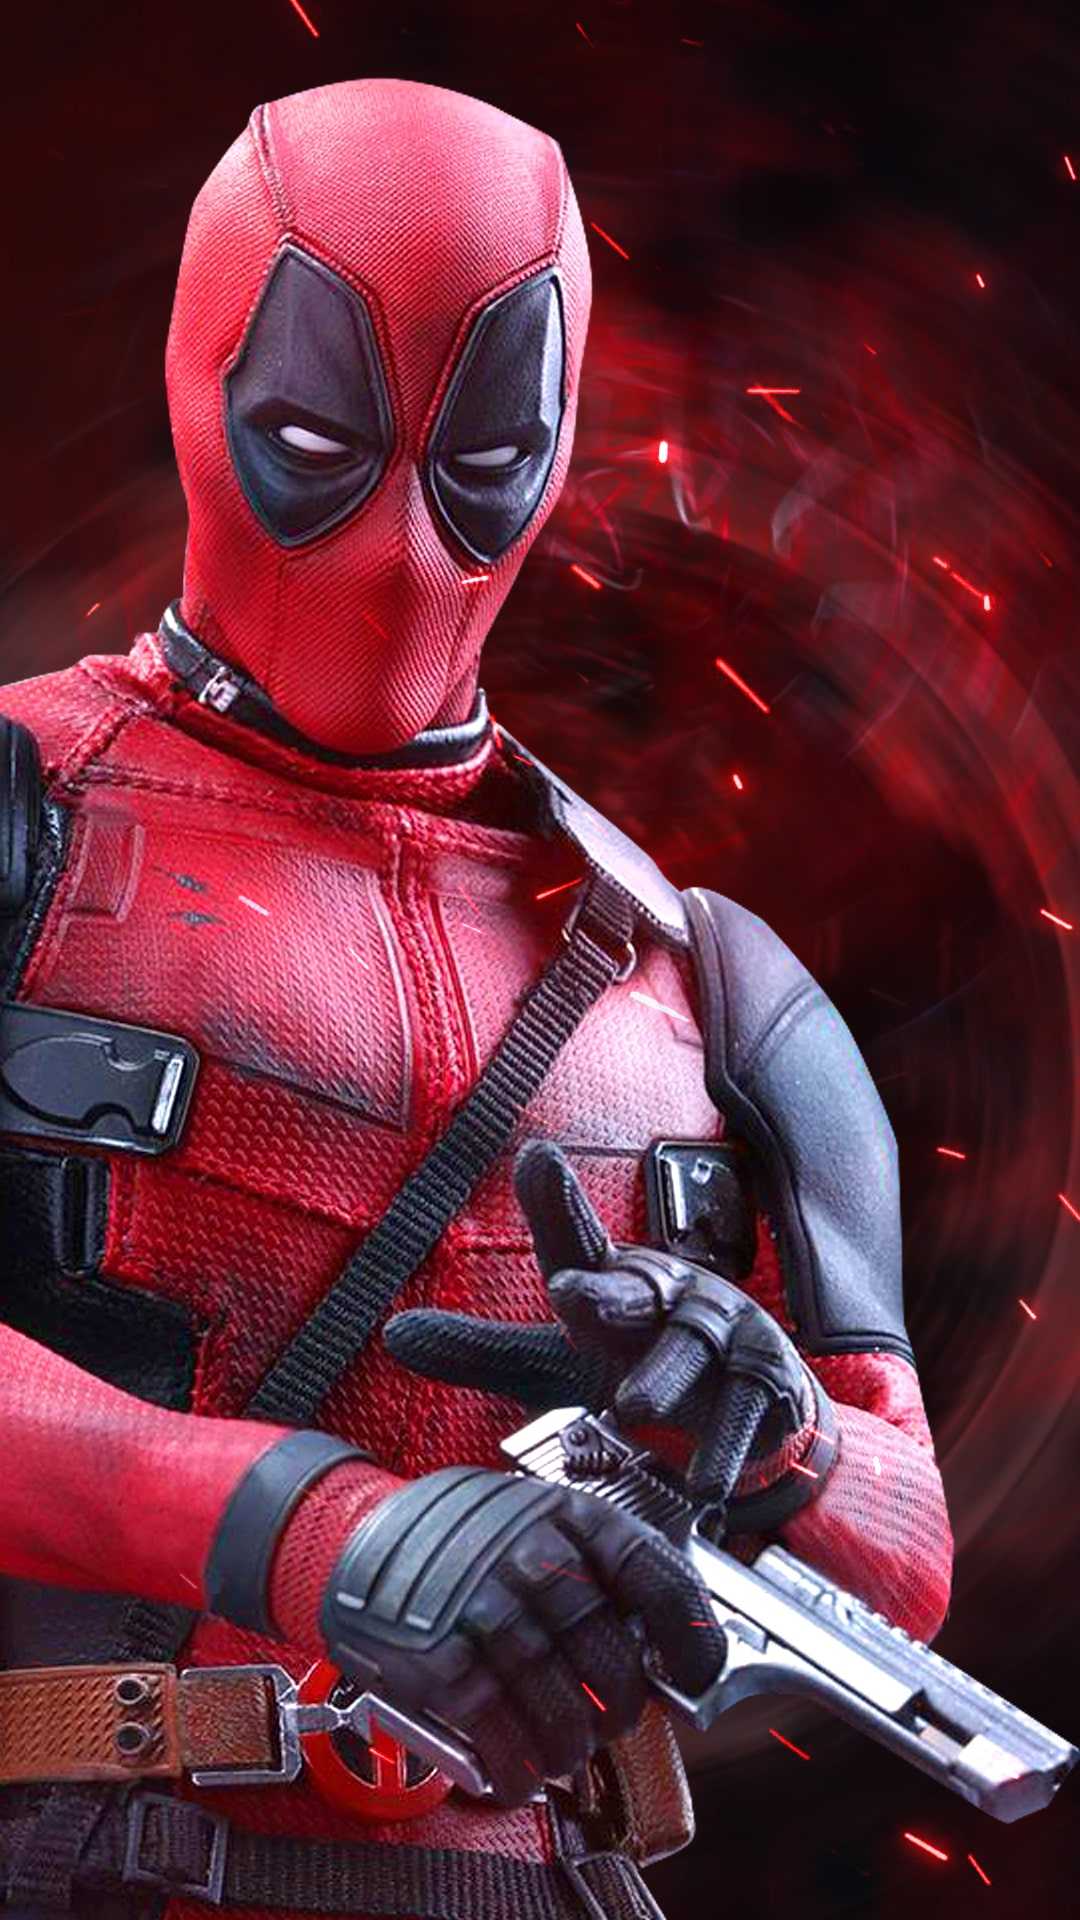 Download Deadpool wallpapers for mobile phone free Deadpool HD pictures